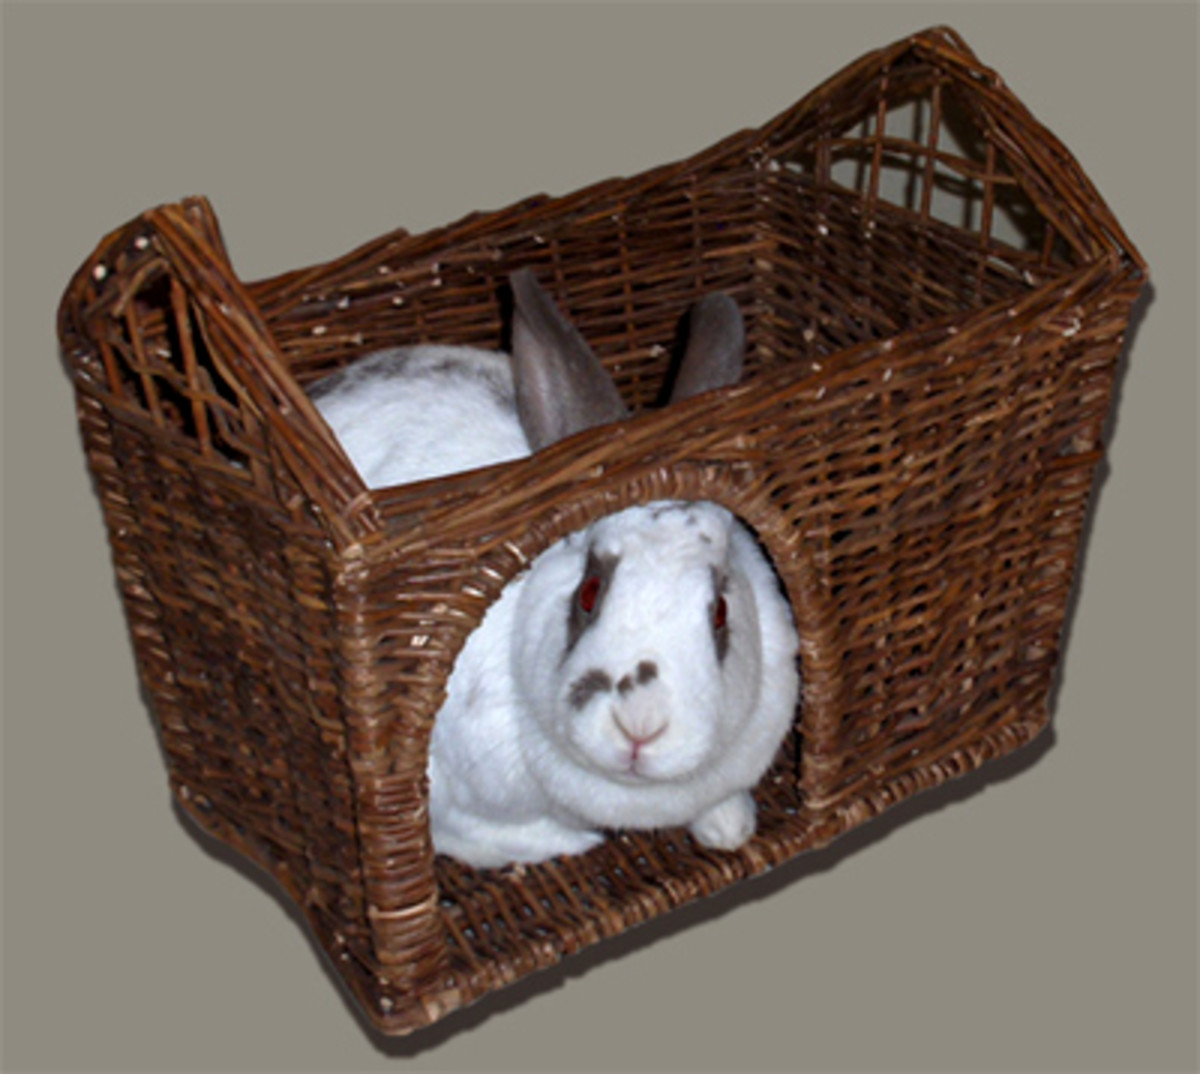 This bunny appears to be enjoying its wicker basket.